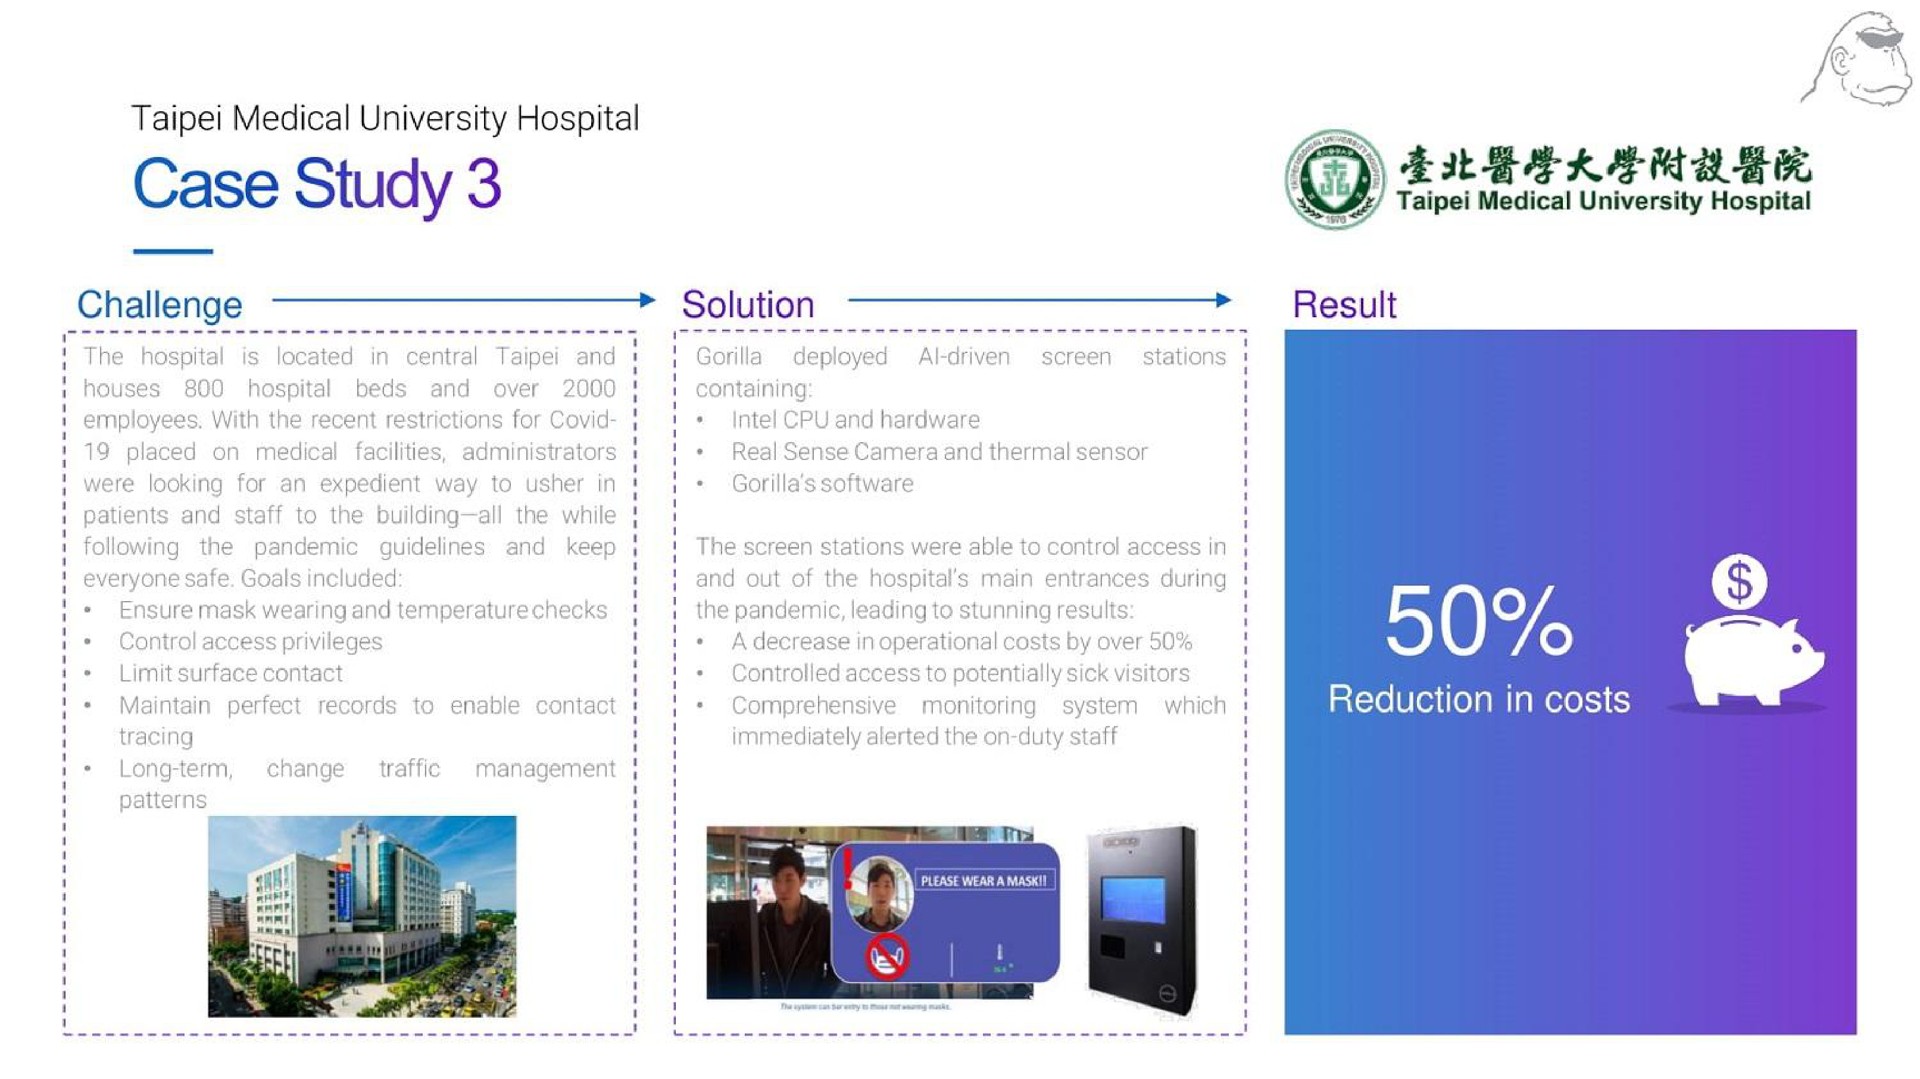 medical university hospital case study challenge maintain result records to enable contact which reduction in costs | Gorilla Technology Group